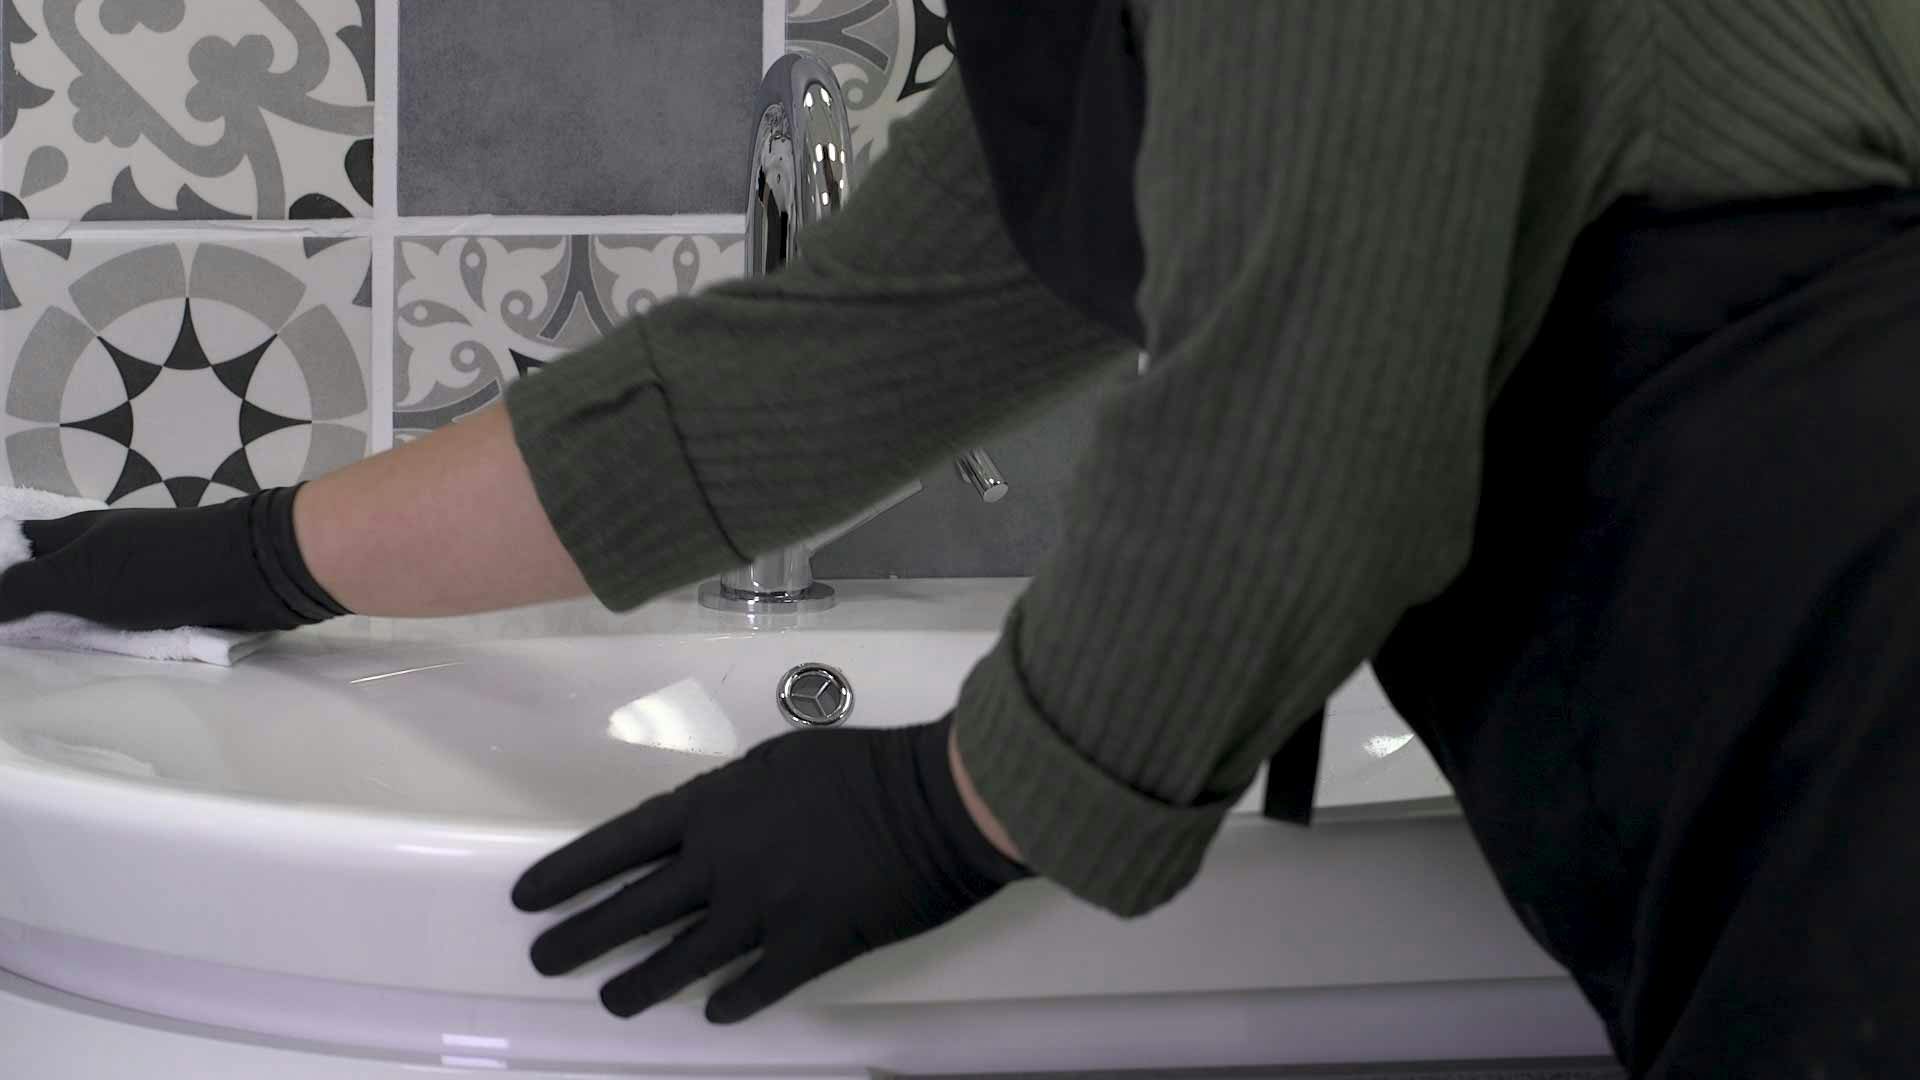 Cleaning with a reusable bathroom wipe